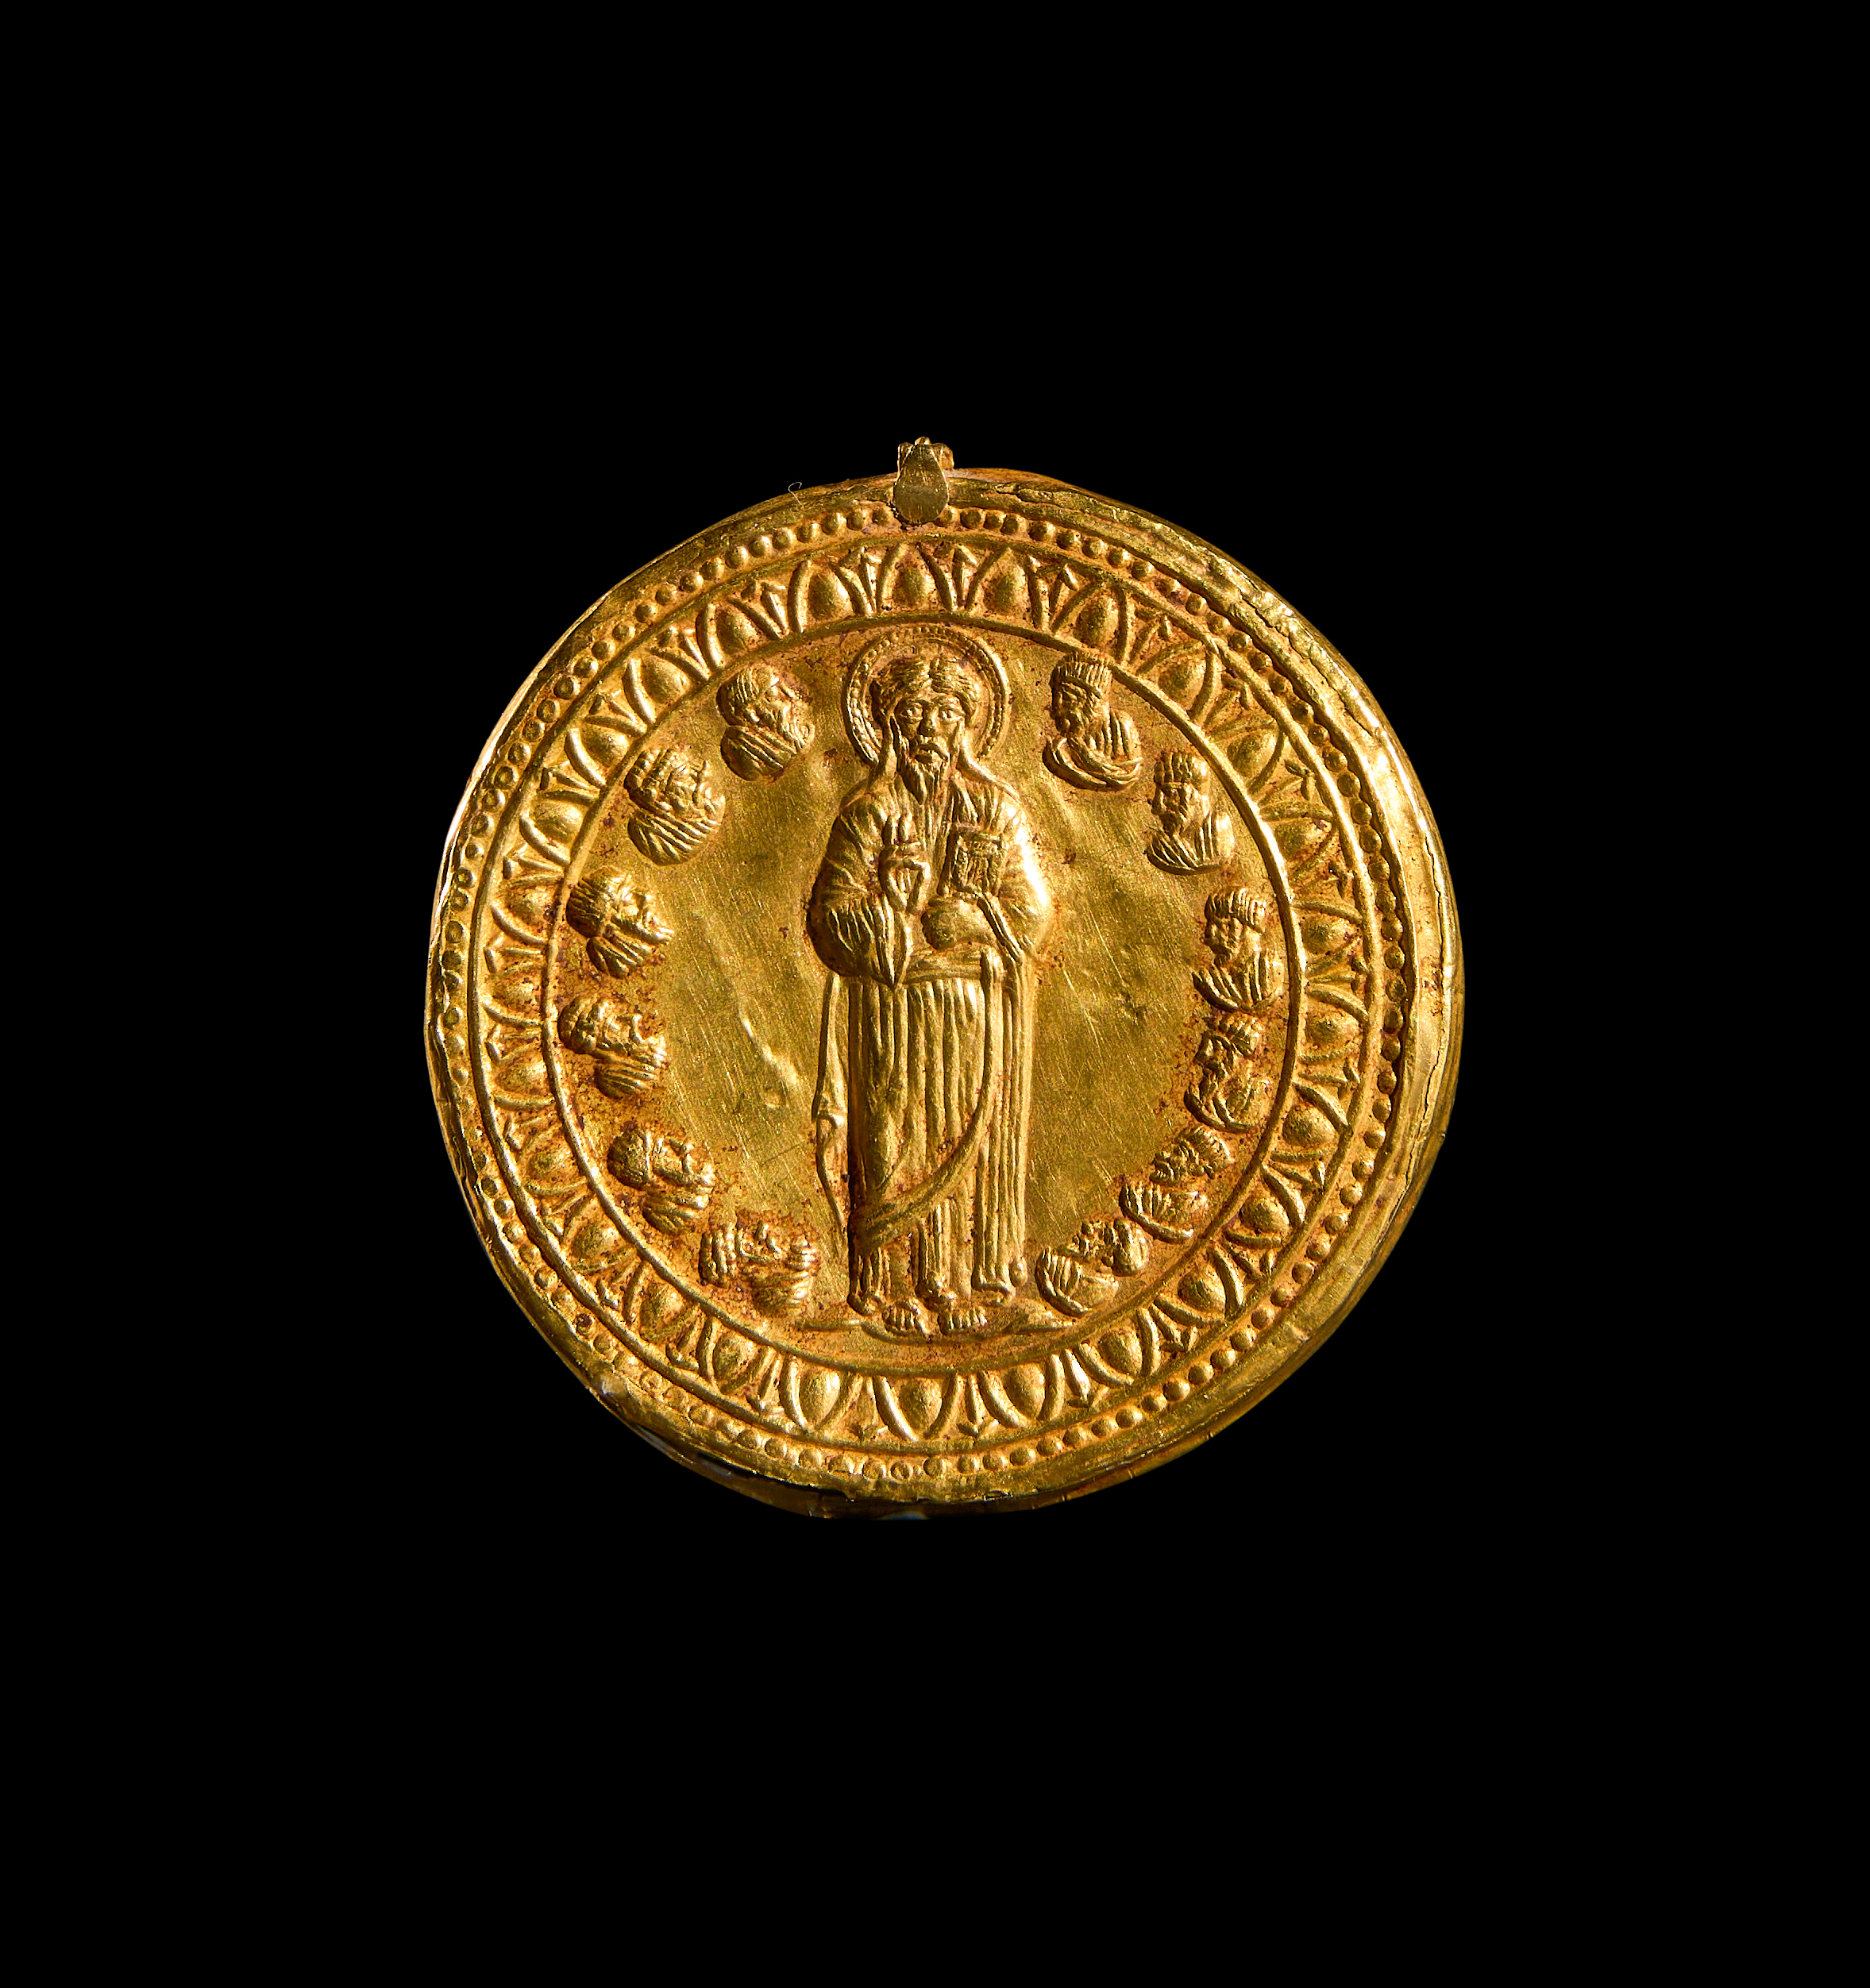 A LARGE GOLD MEDALLION DEPICTING JESUS & THE TWELVE DISCIPLES, BYZANTINE 3RD-5TH CENTURY